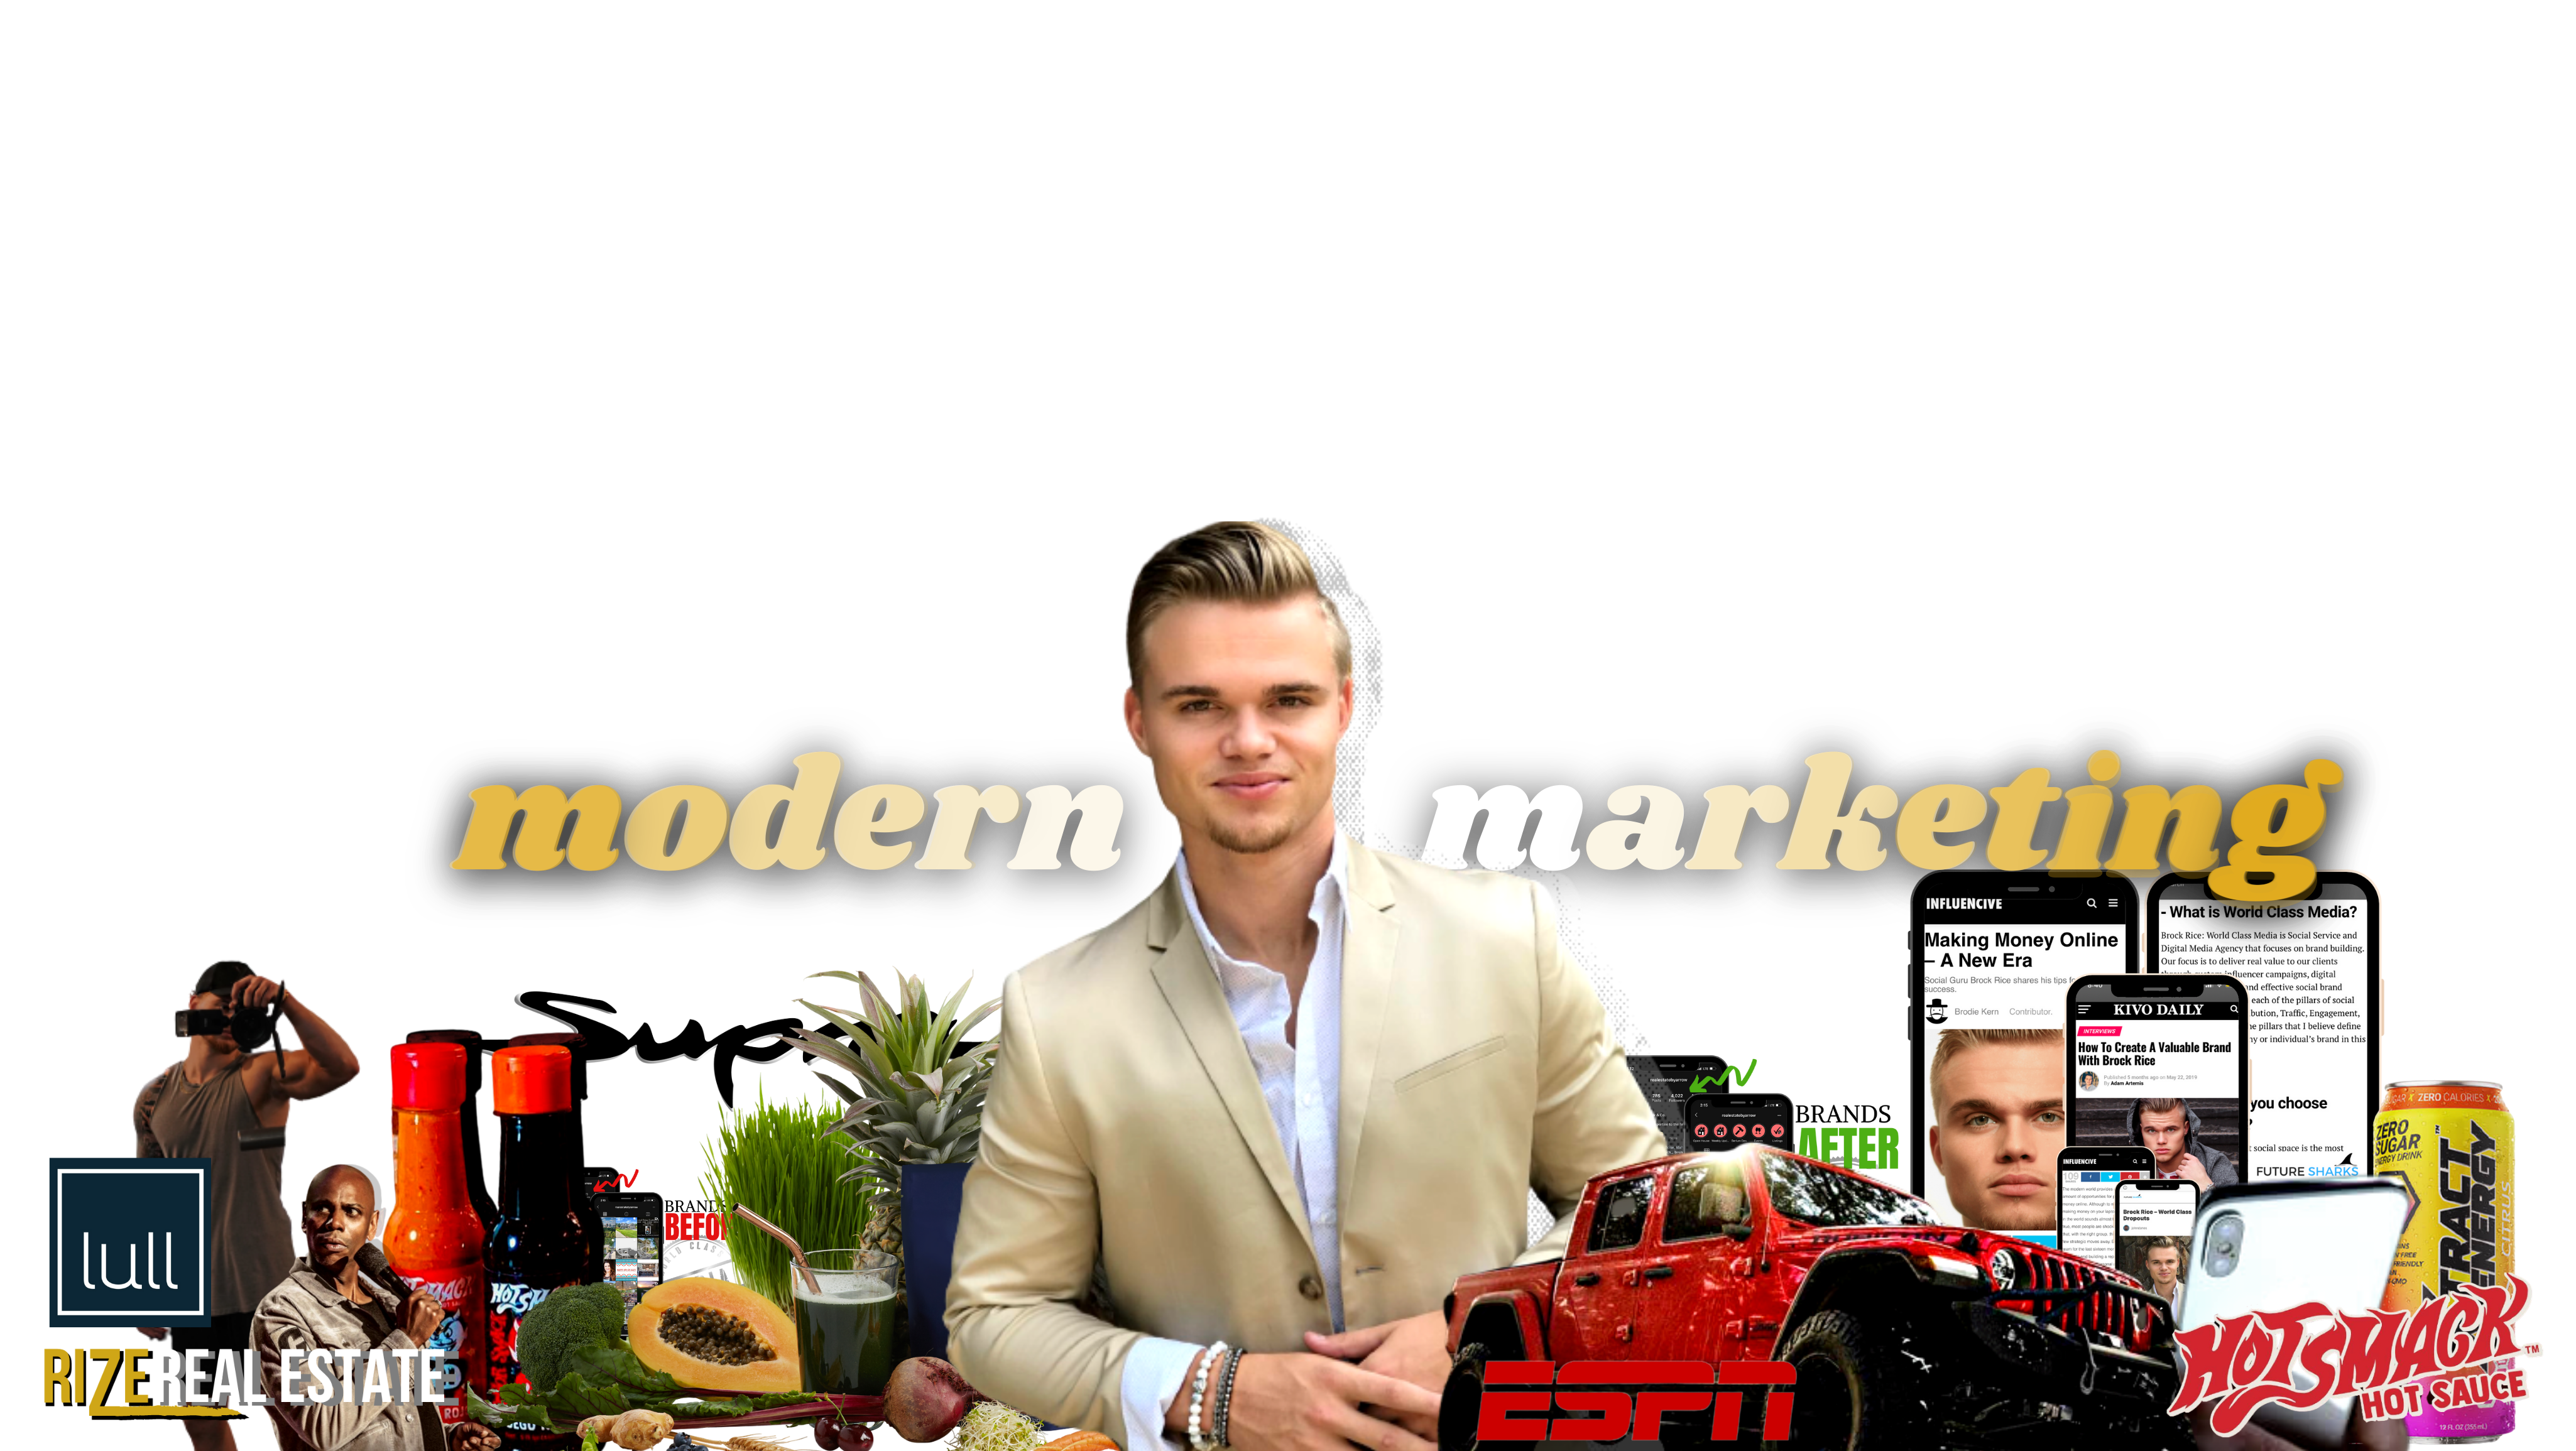 Brock Rice, Modern Marketing, How to build a brand 2022, branding web3, web3 media, webster media, webster m3dia, boise idaho, best boise idaho brand, boise brand builder, best brand boise